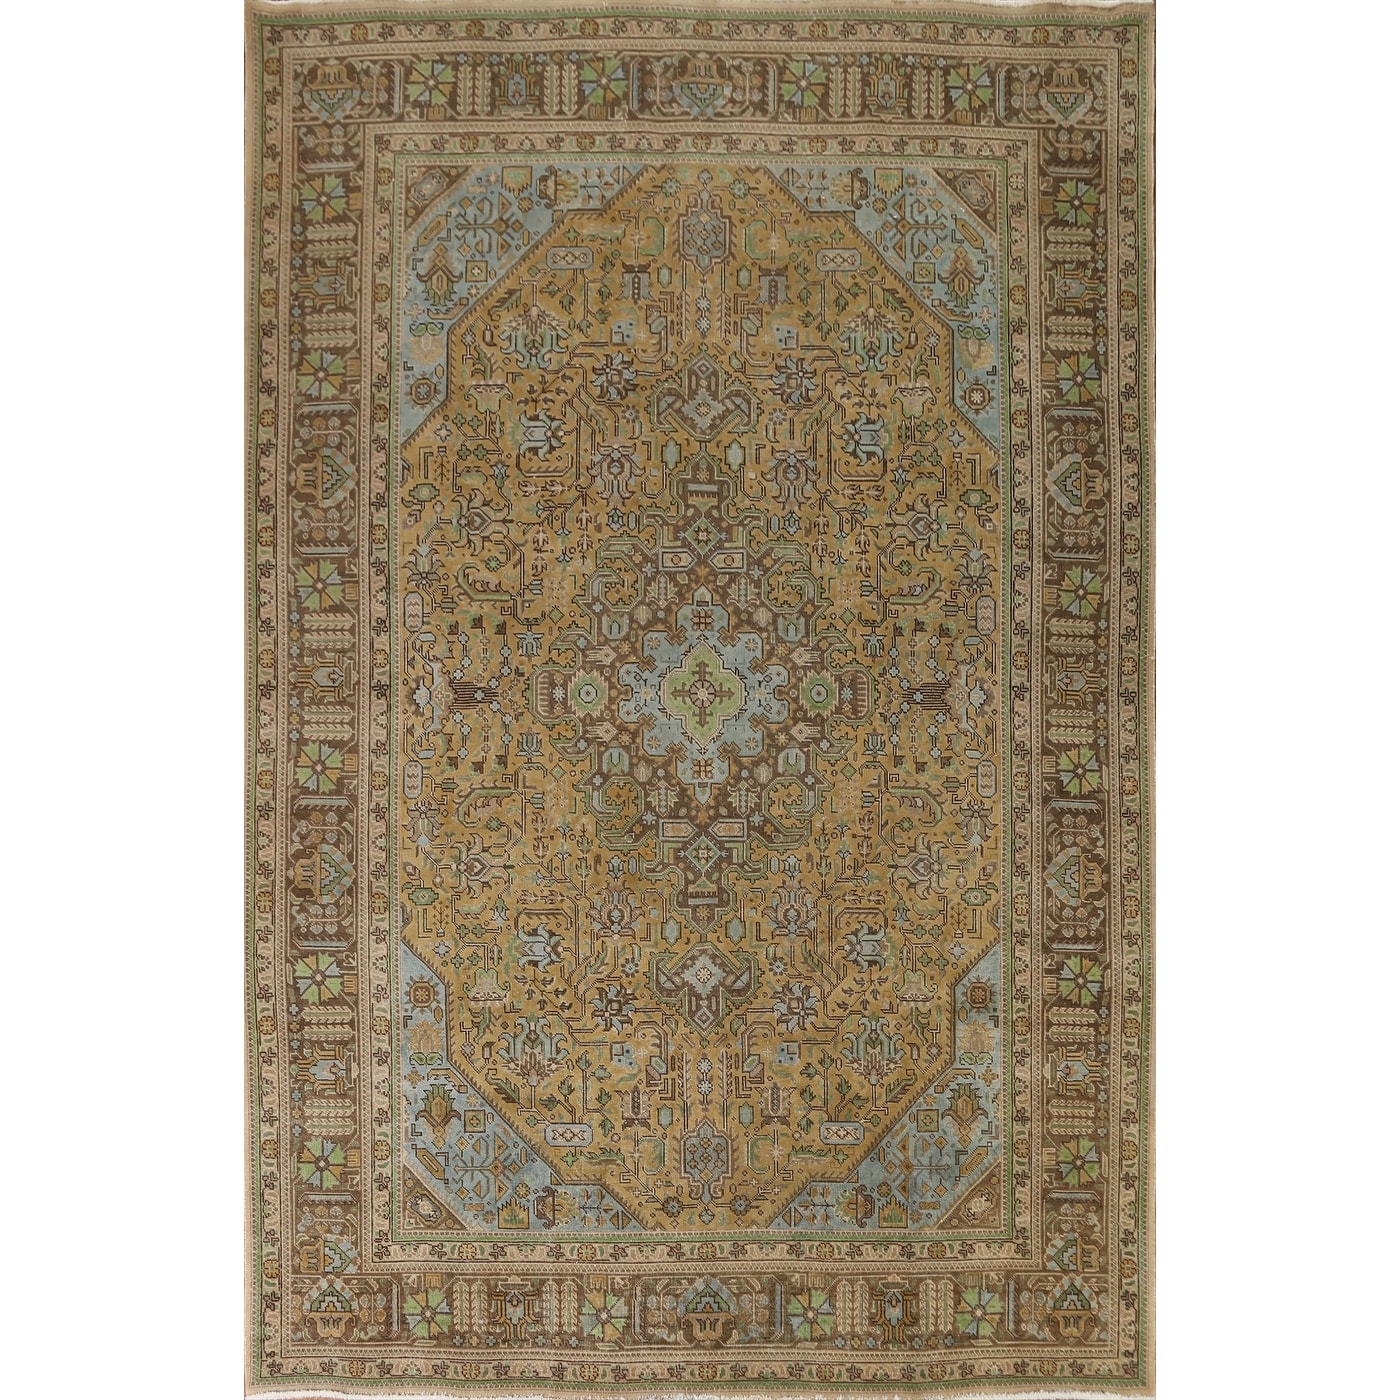 https://ak1.ostkcdn.com/images/products/is/images/direct/89c6a437ea411f8bb87ee02f1140d8df242d69ed/Vintage-Over-dyed-Tabriz-Persian-Area-Rug-Hand-knotted-Wool-Carpet.jpg